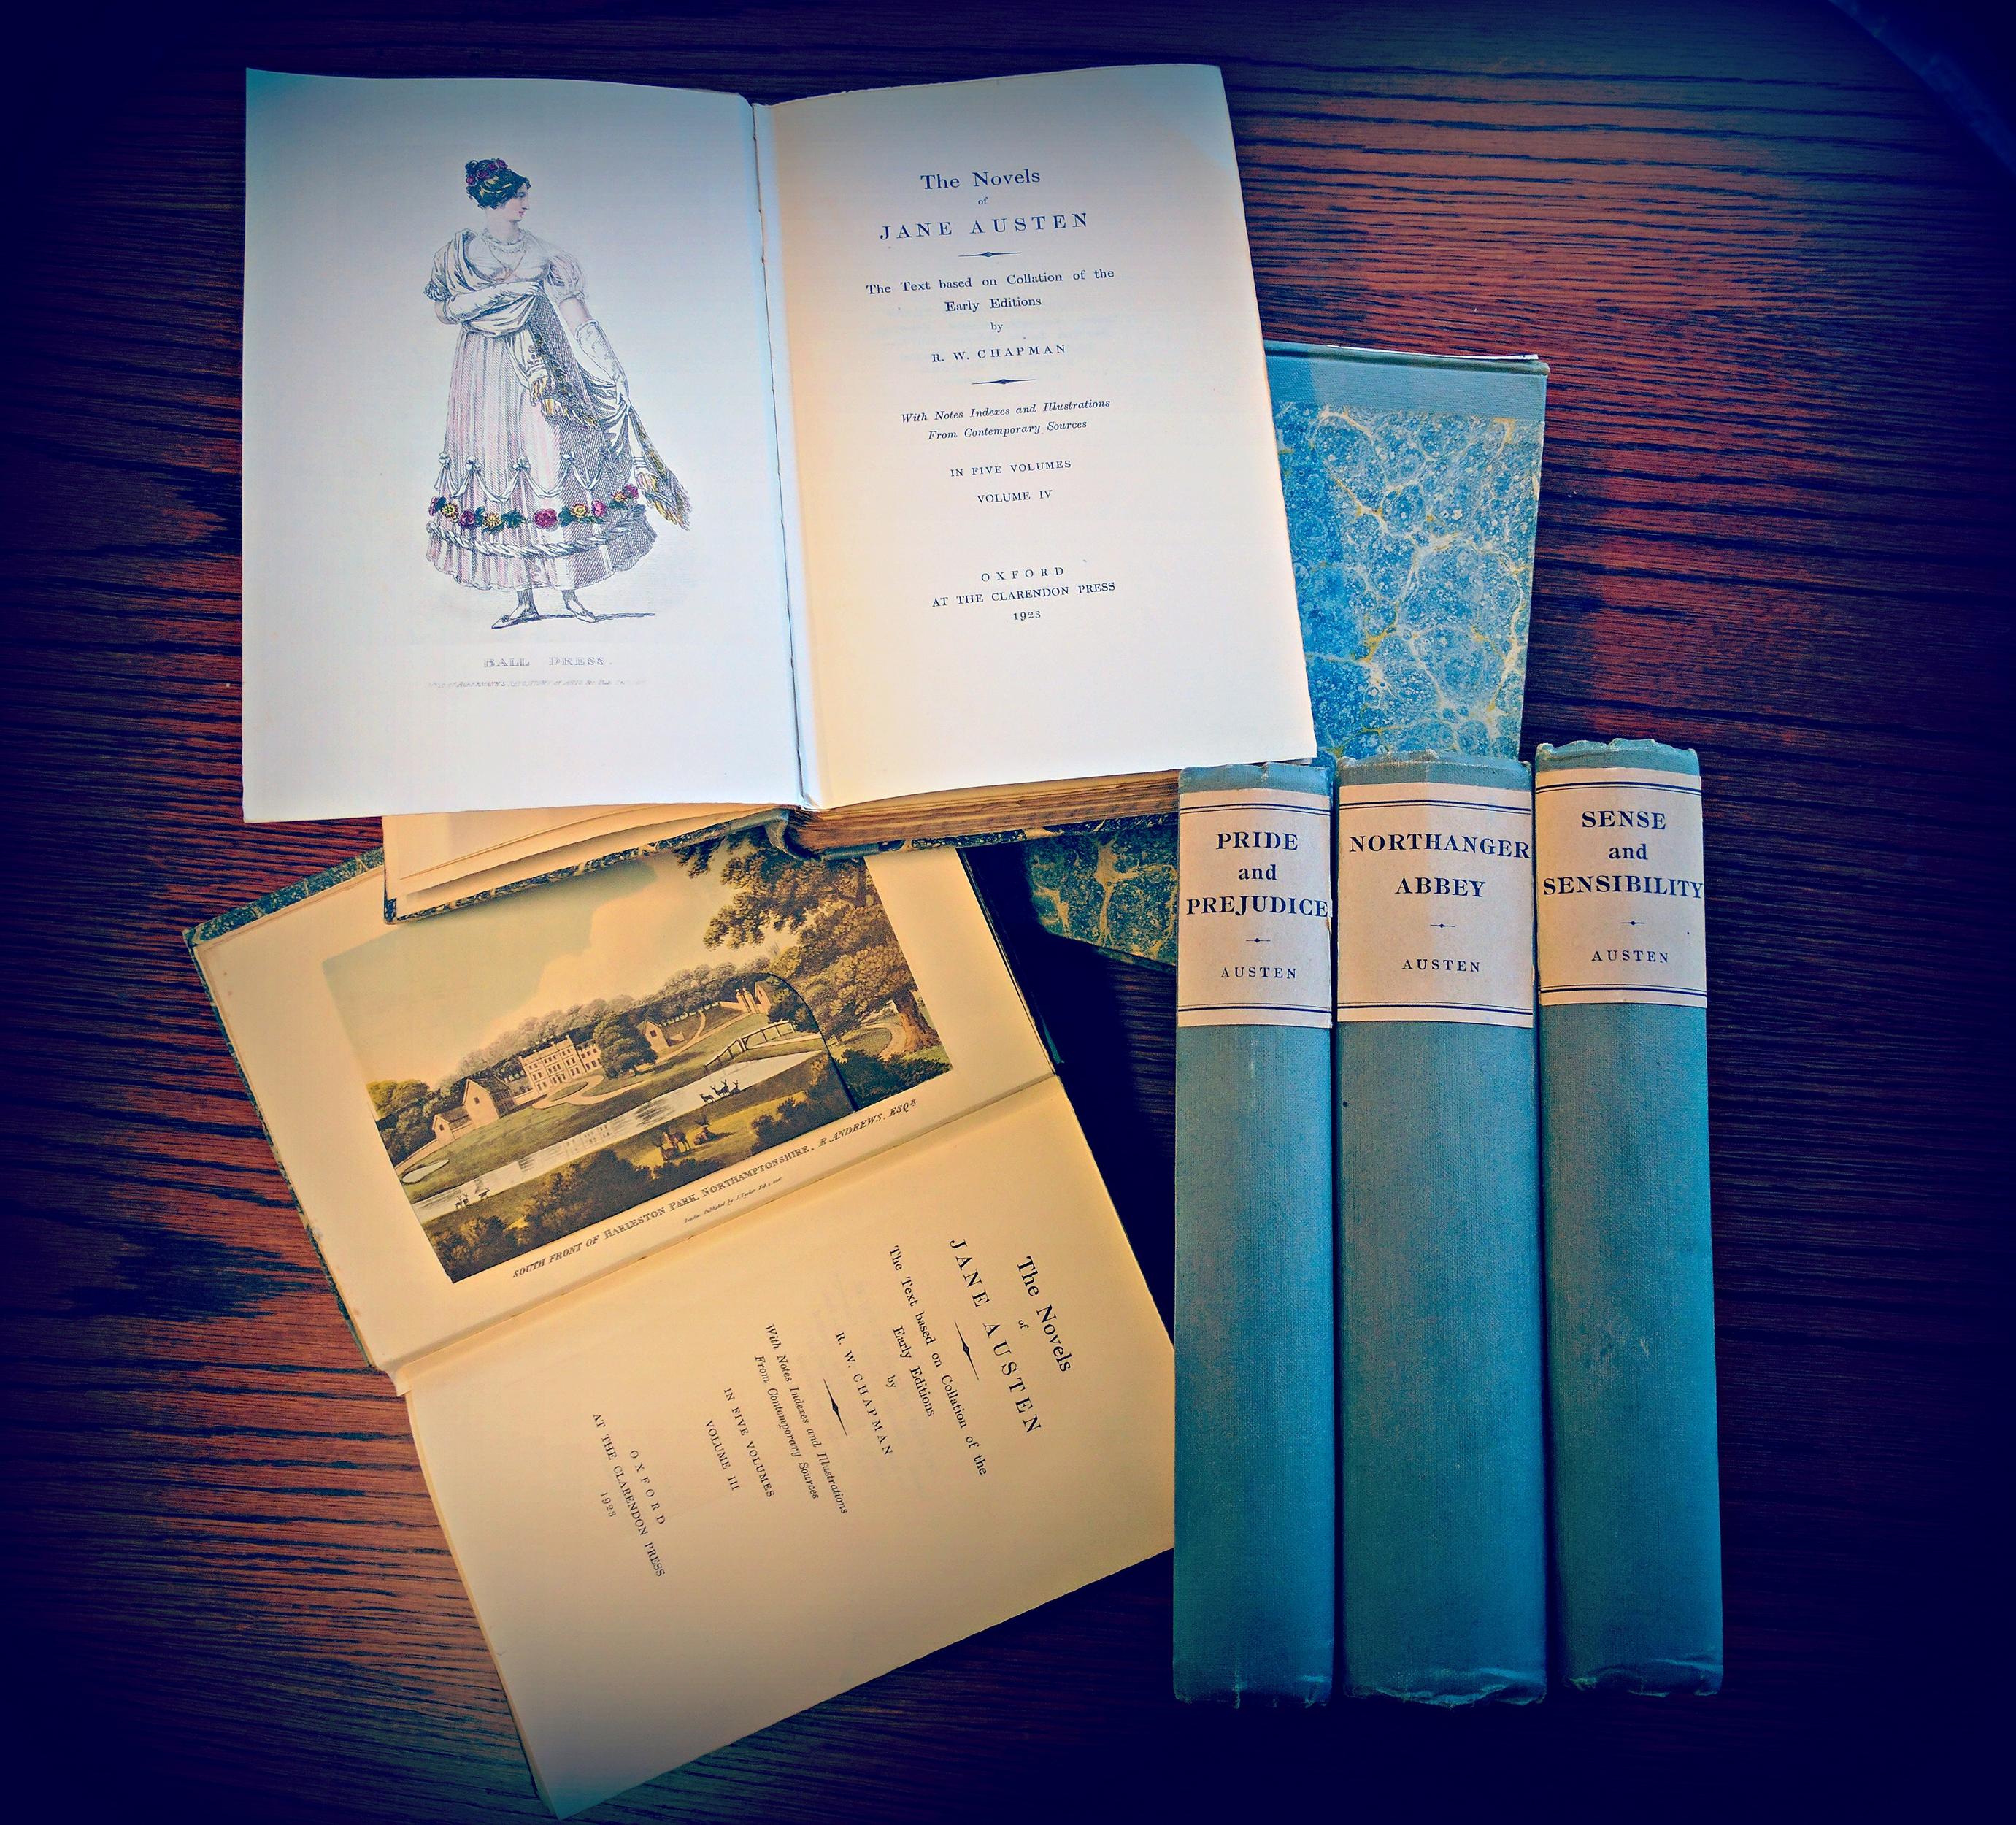 1923 edited of Jane Austen's works by R.W. Chapman and published by Clarendon press in Oxford